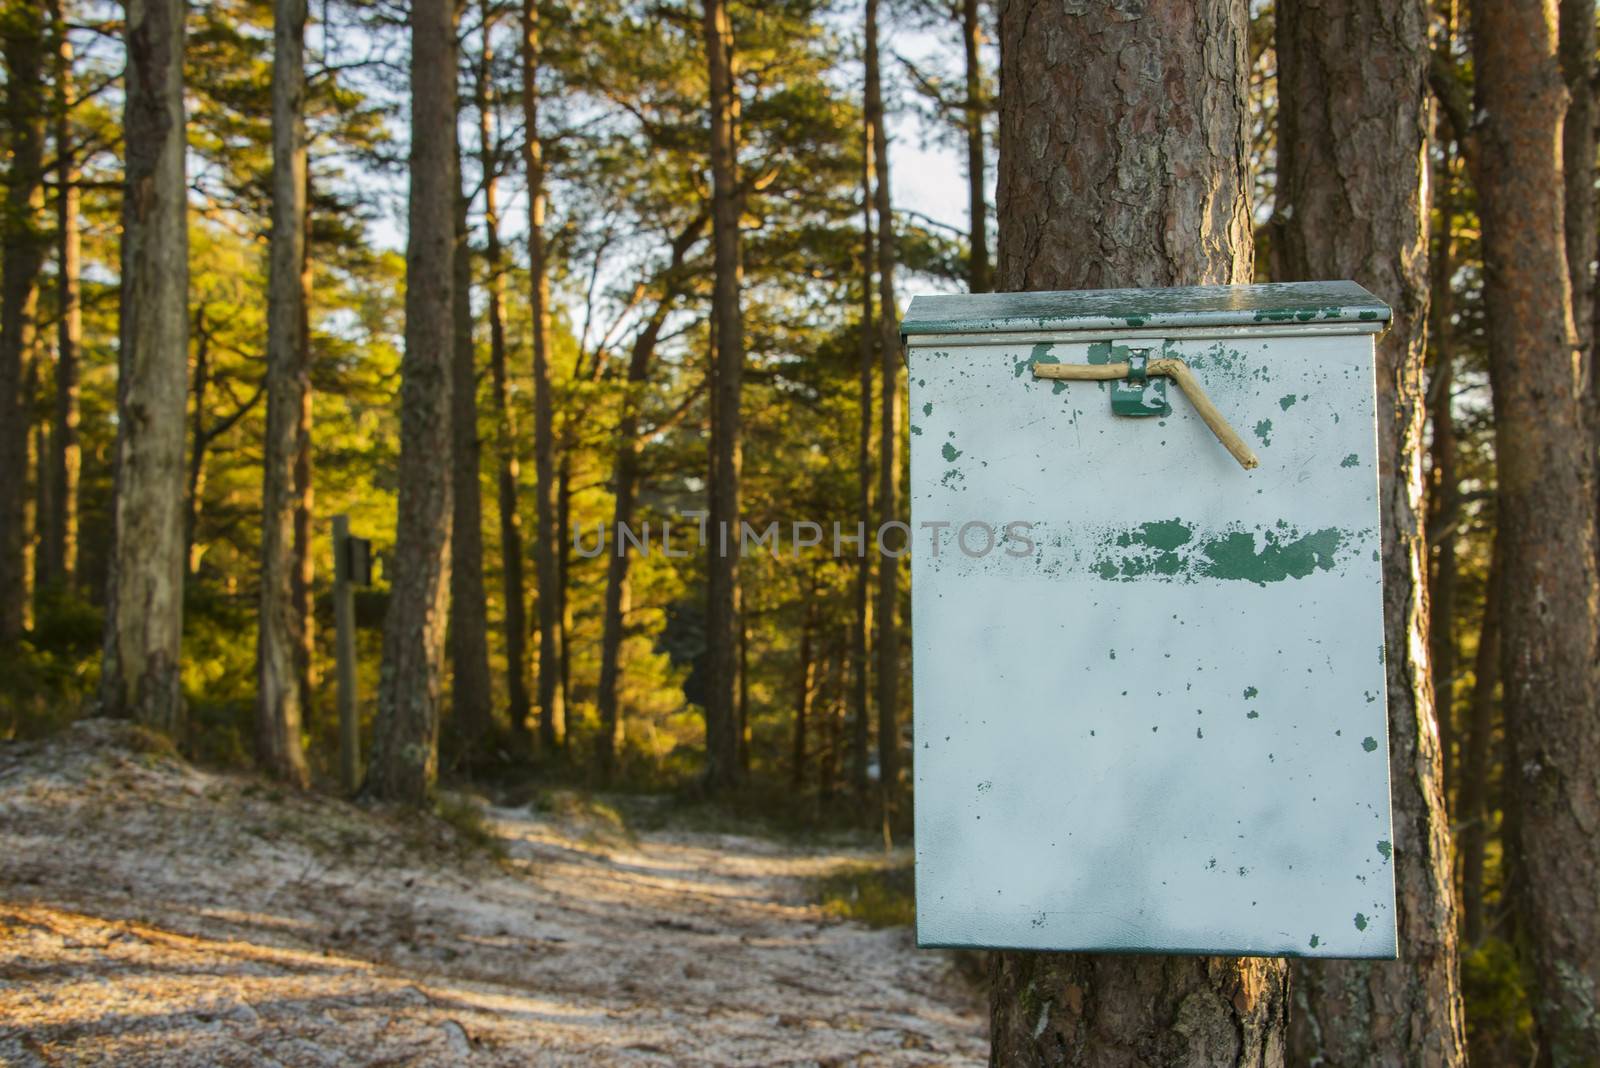 An old worn mailbox in the forest